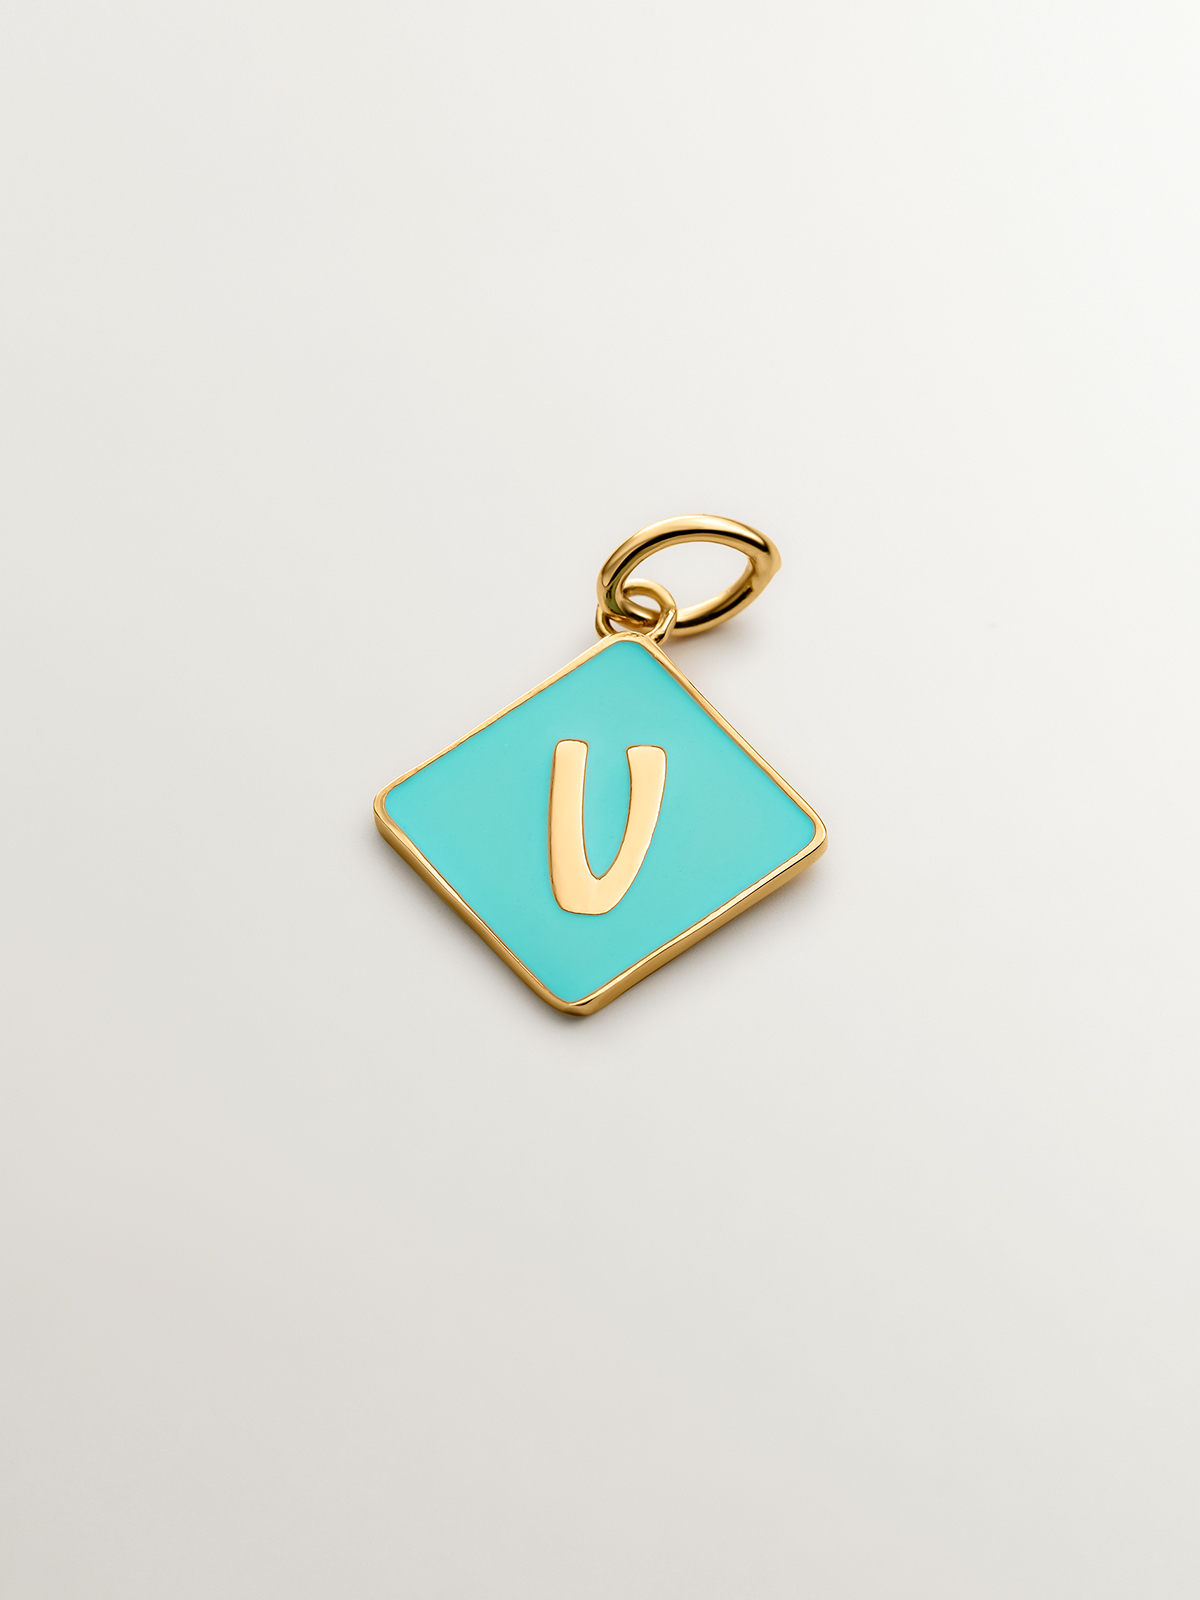 18K yellow gold plated 925 sterling silver charm with V initial and turquoise enamel in the shape of a diamond